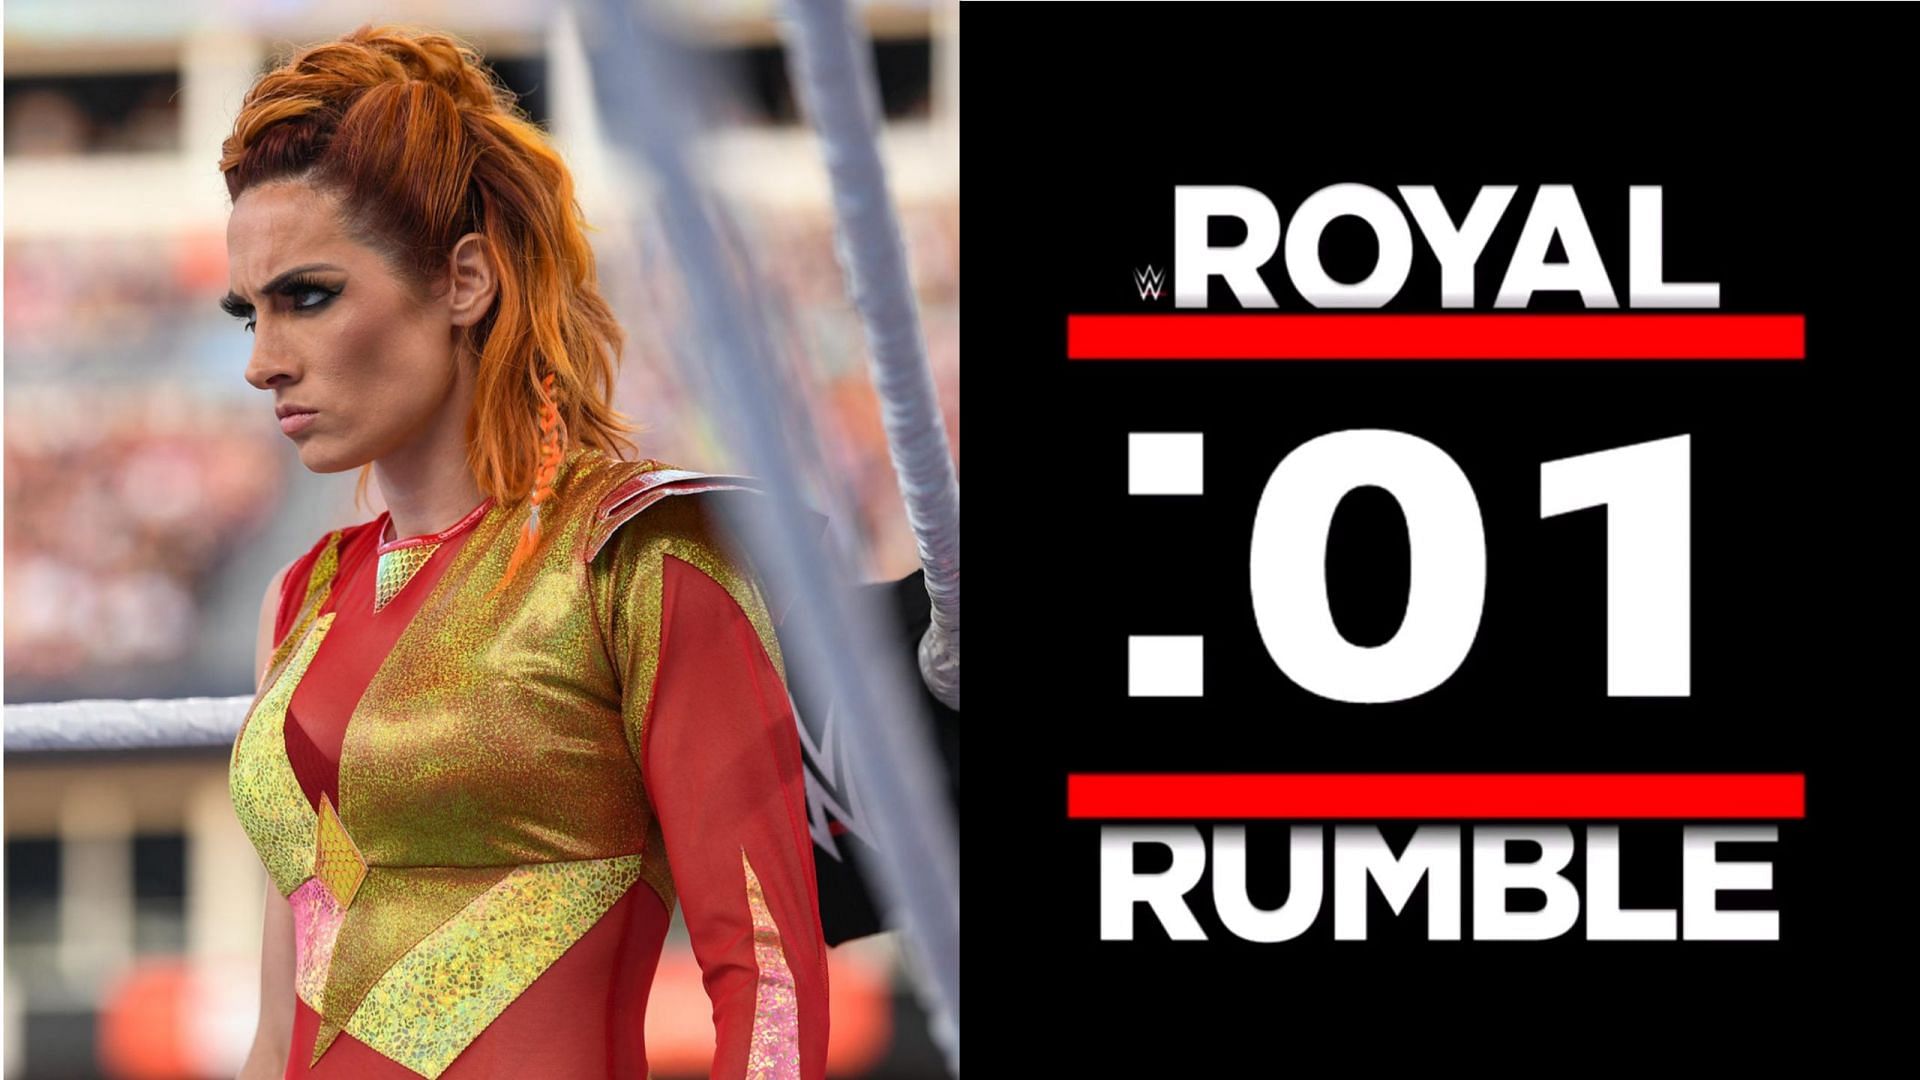 Will Becky Lynch become the first-ever 2-time Royal Rumble winner?